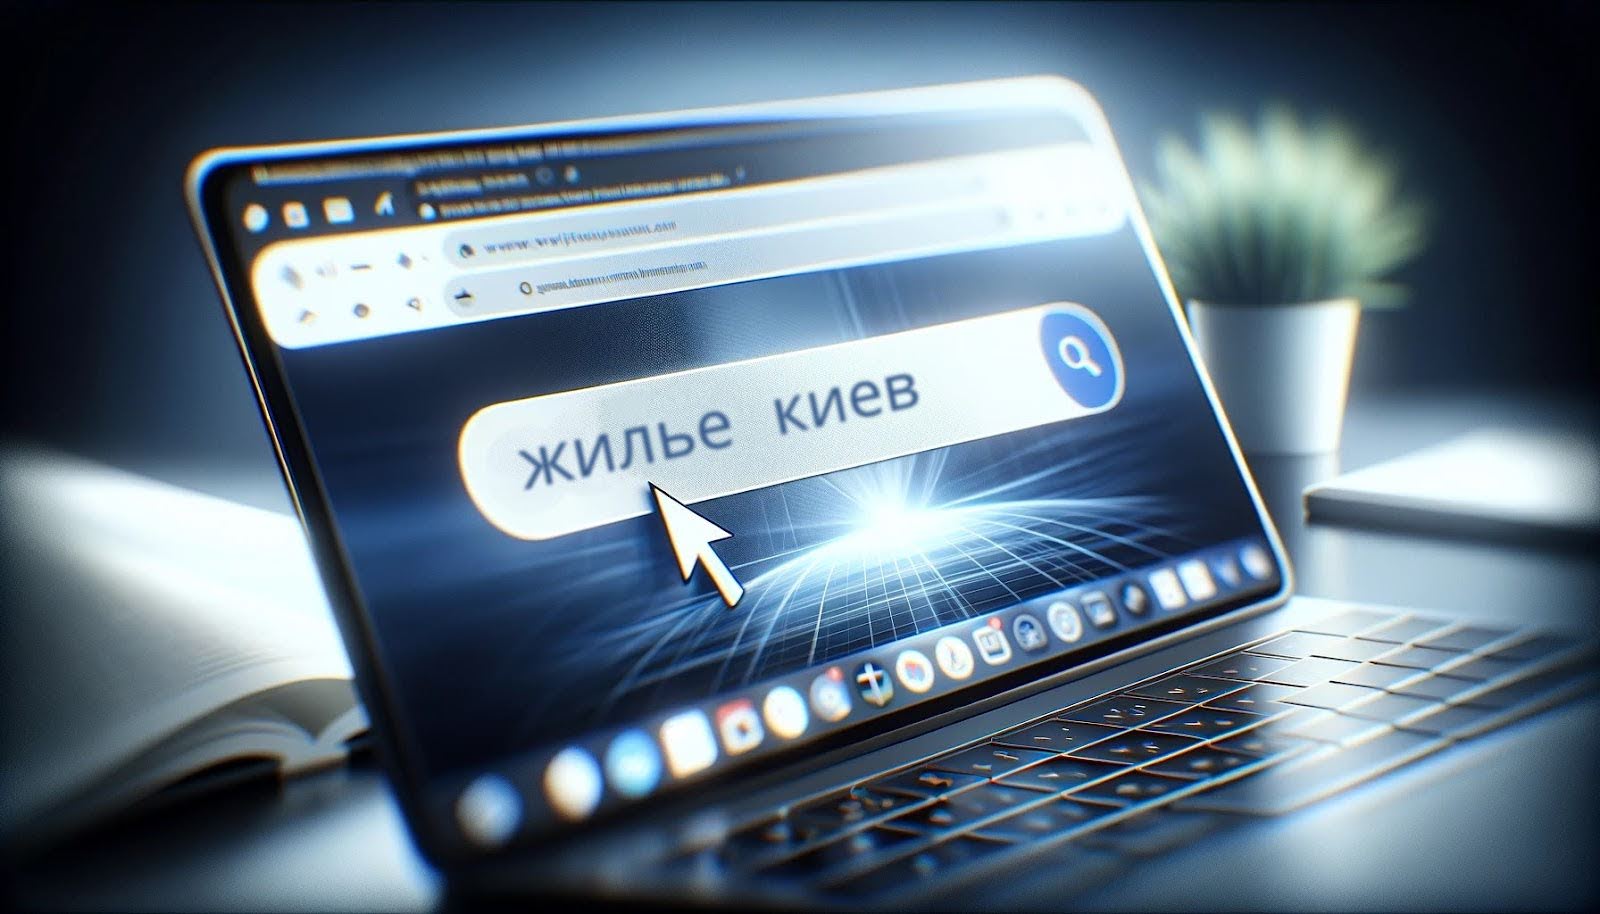 Search line with the request for housing in Kyiv